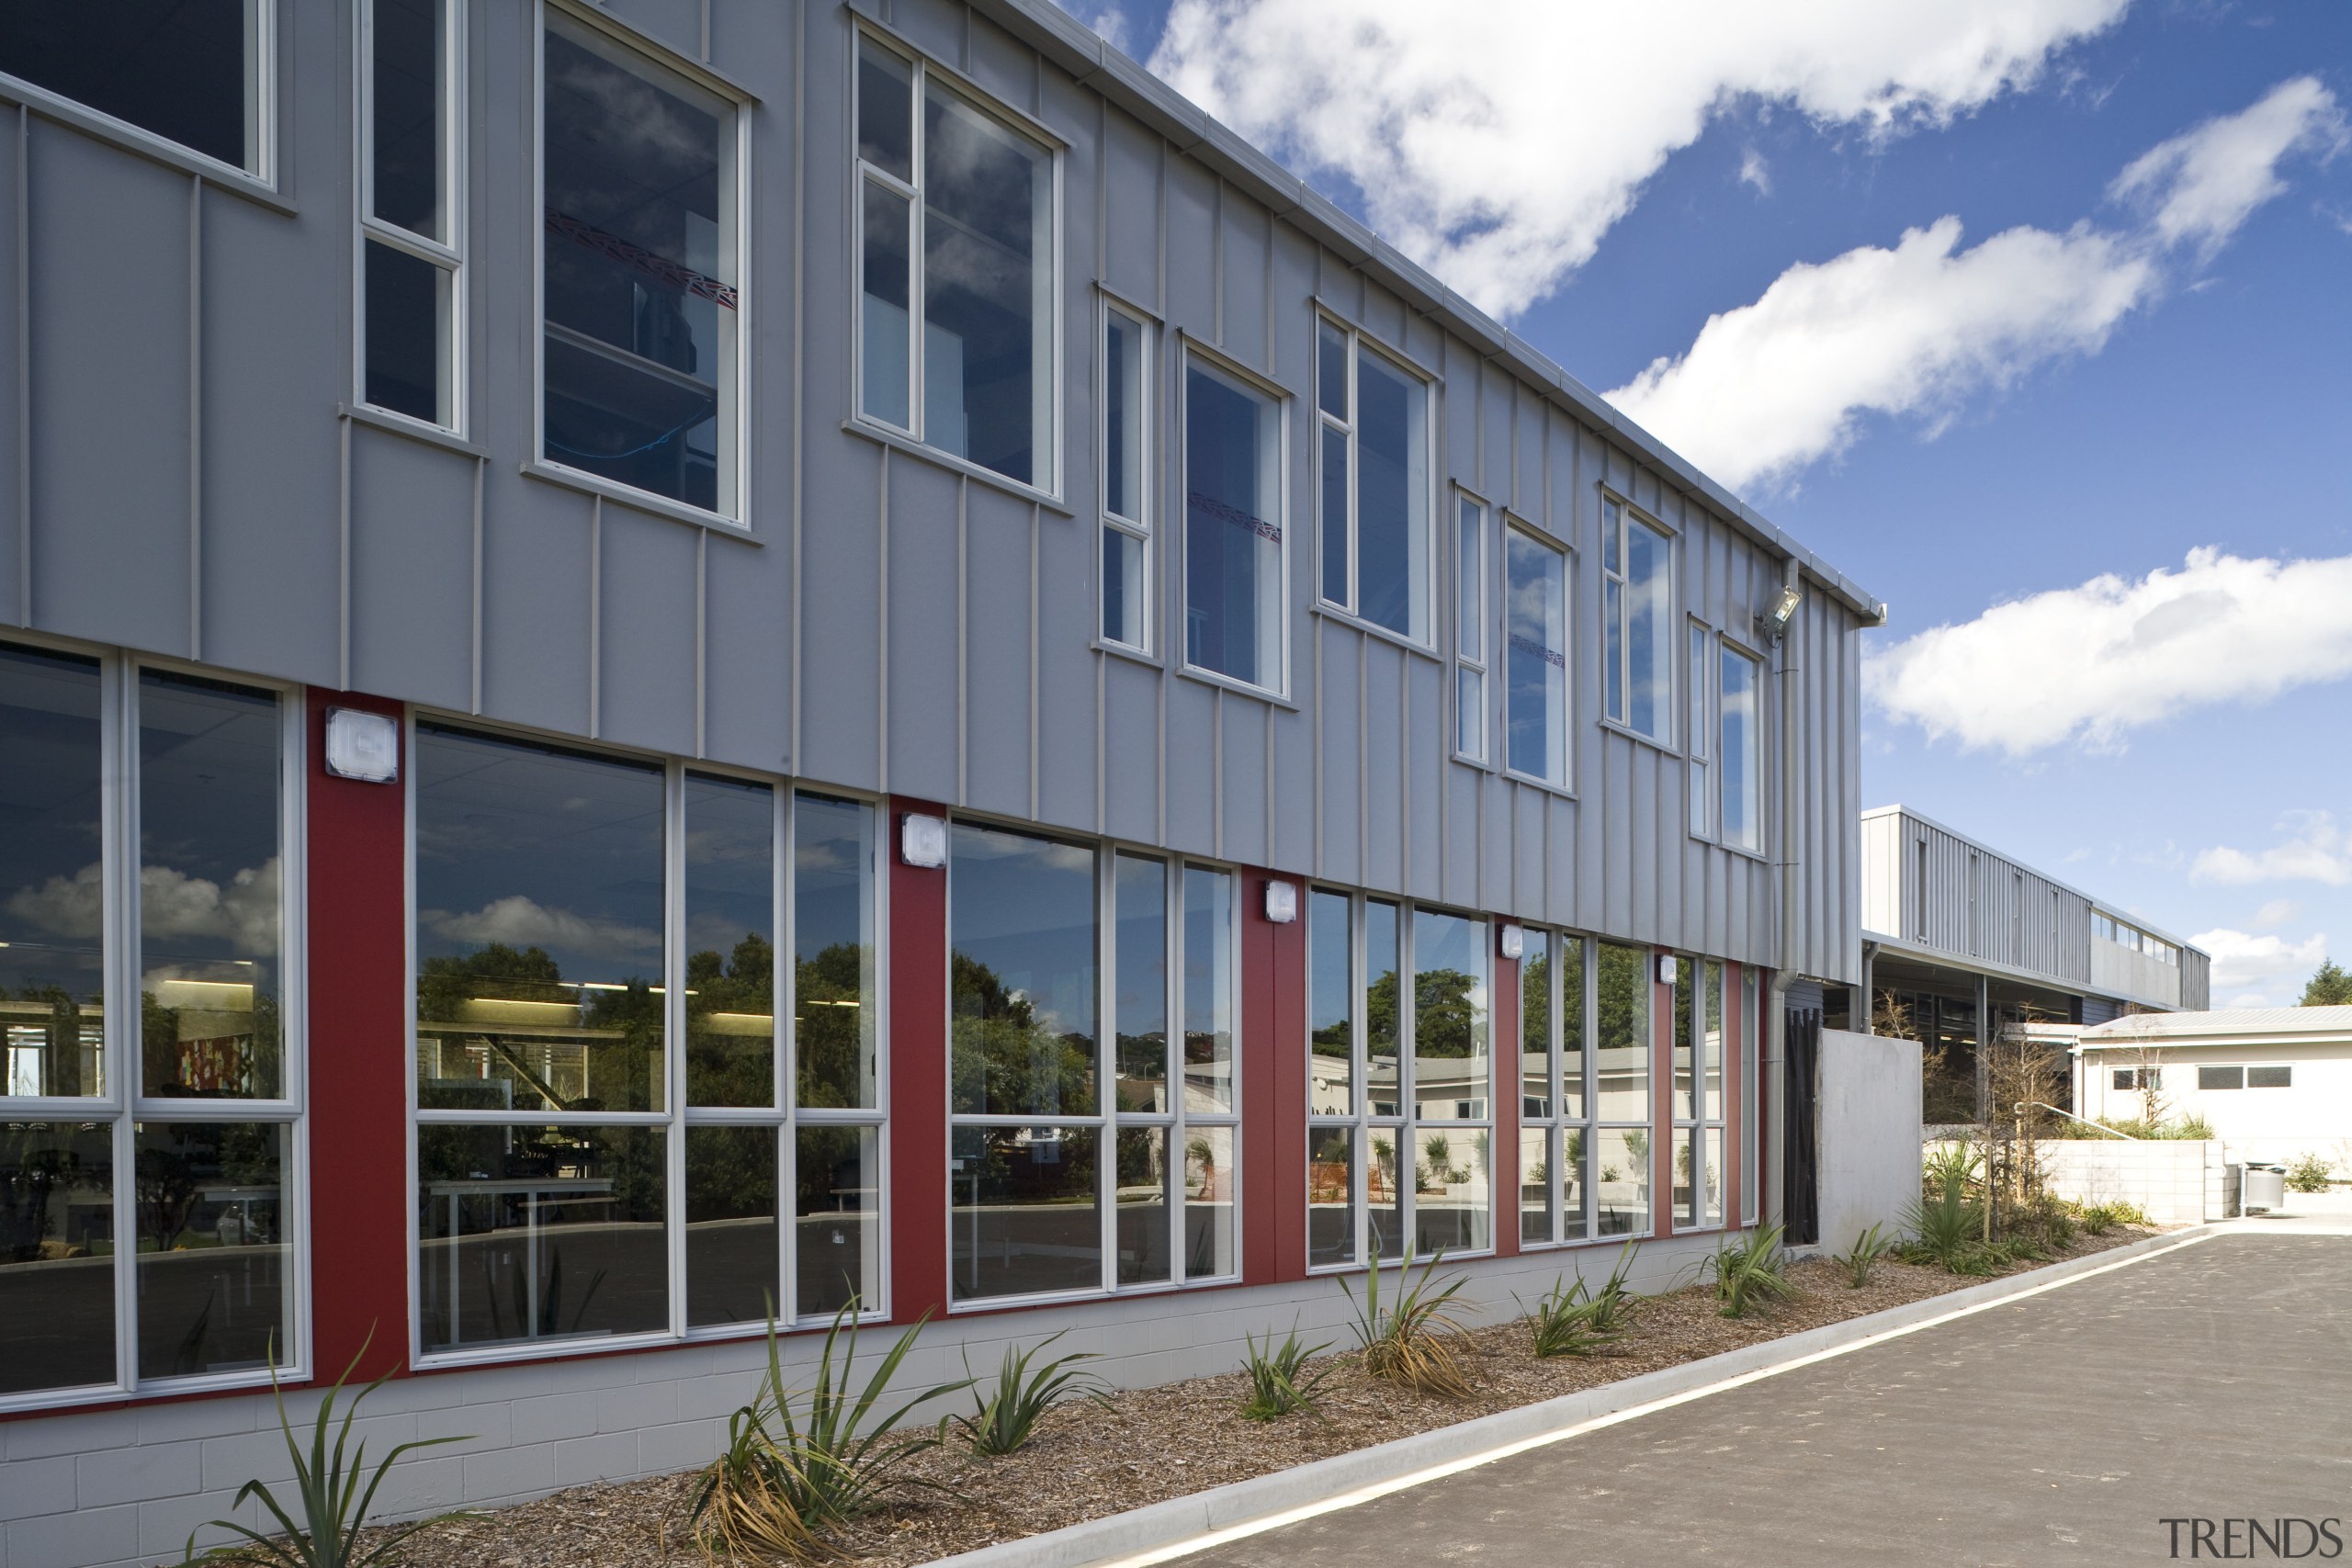 Exterior view of school which features cladding manufactured building, commercial building, corporate headquarters, facade, house, mixed use, property, real estate, gray